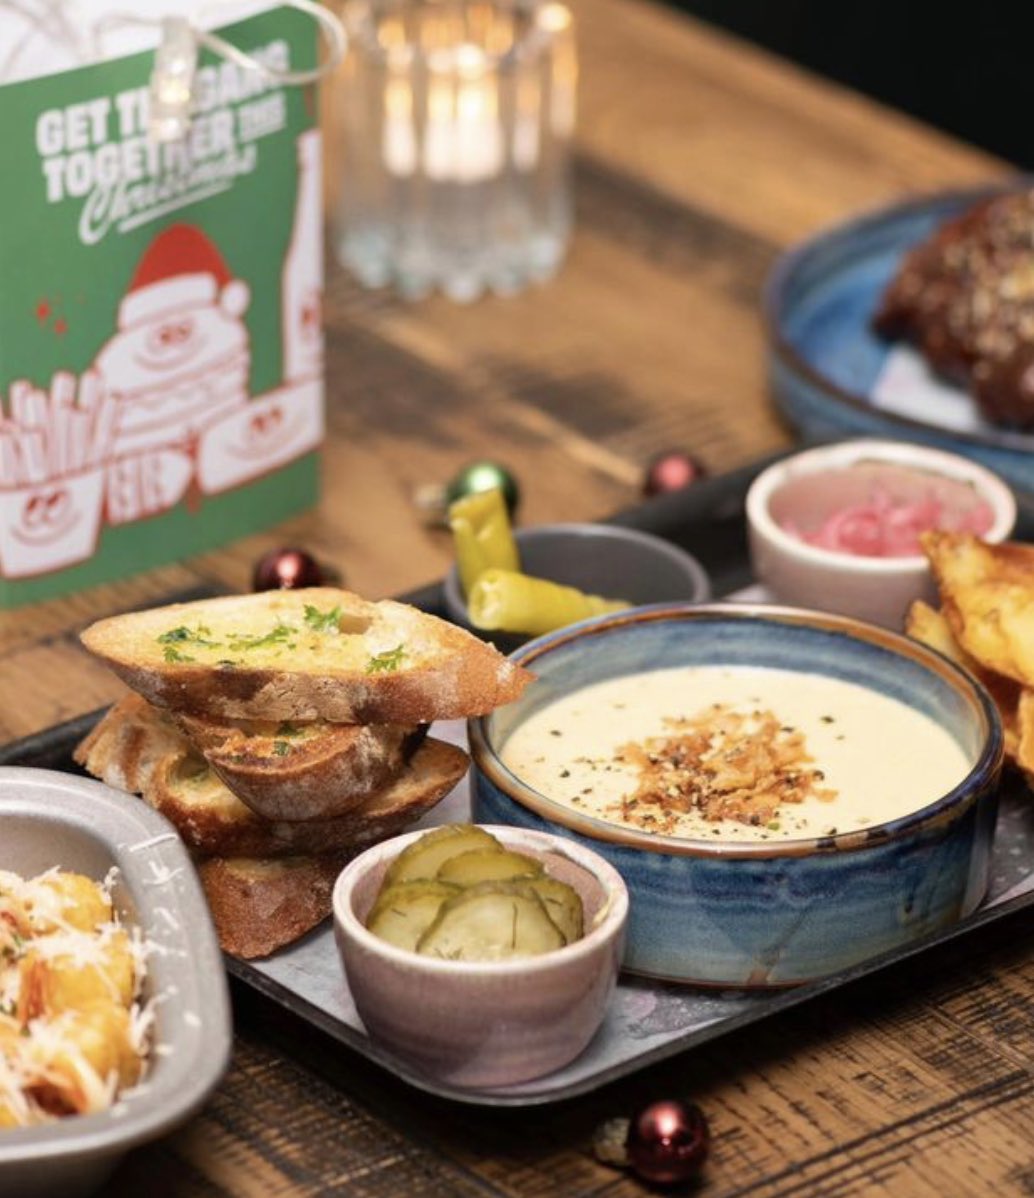 Get the gang together this Christmas! 🎄 From a Beer Fondue, to the Wagyu Wonderland, there’s something for everyone! Check out our menus 👉 bit.ly/3PIQhNq